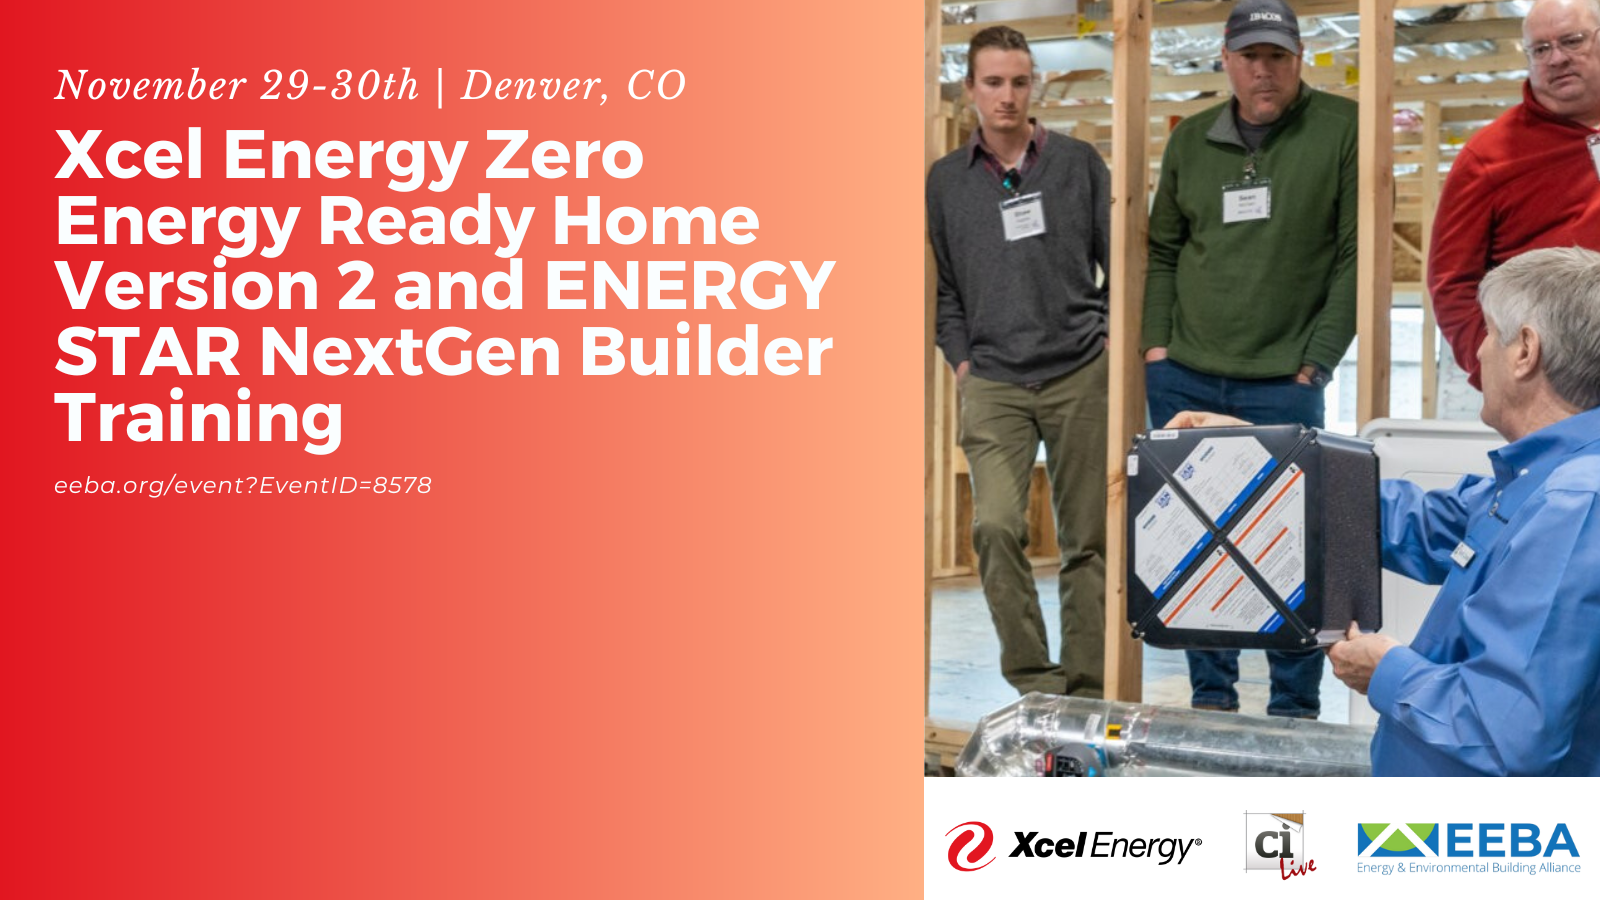 Two-Day Xcel Energy ZERH and EnergyStar NextGen Builder Training Event Set to Empower Sustainable Home Construction